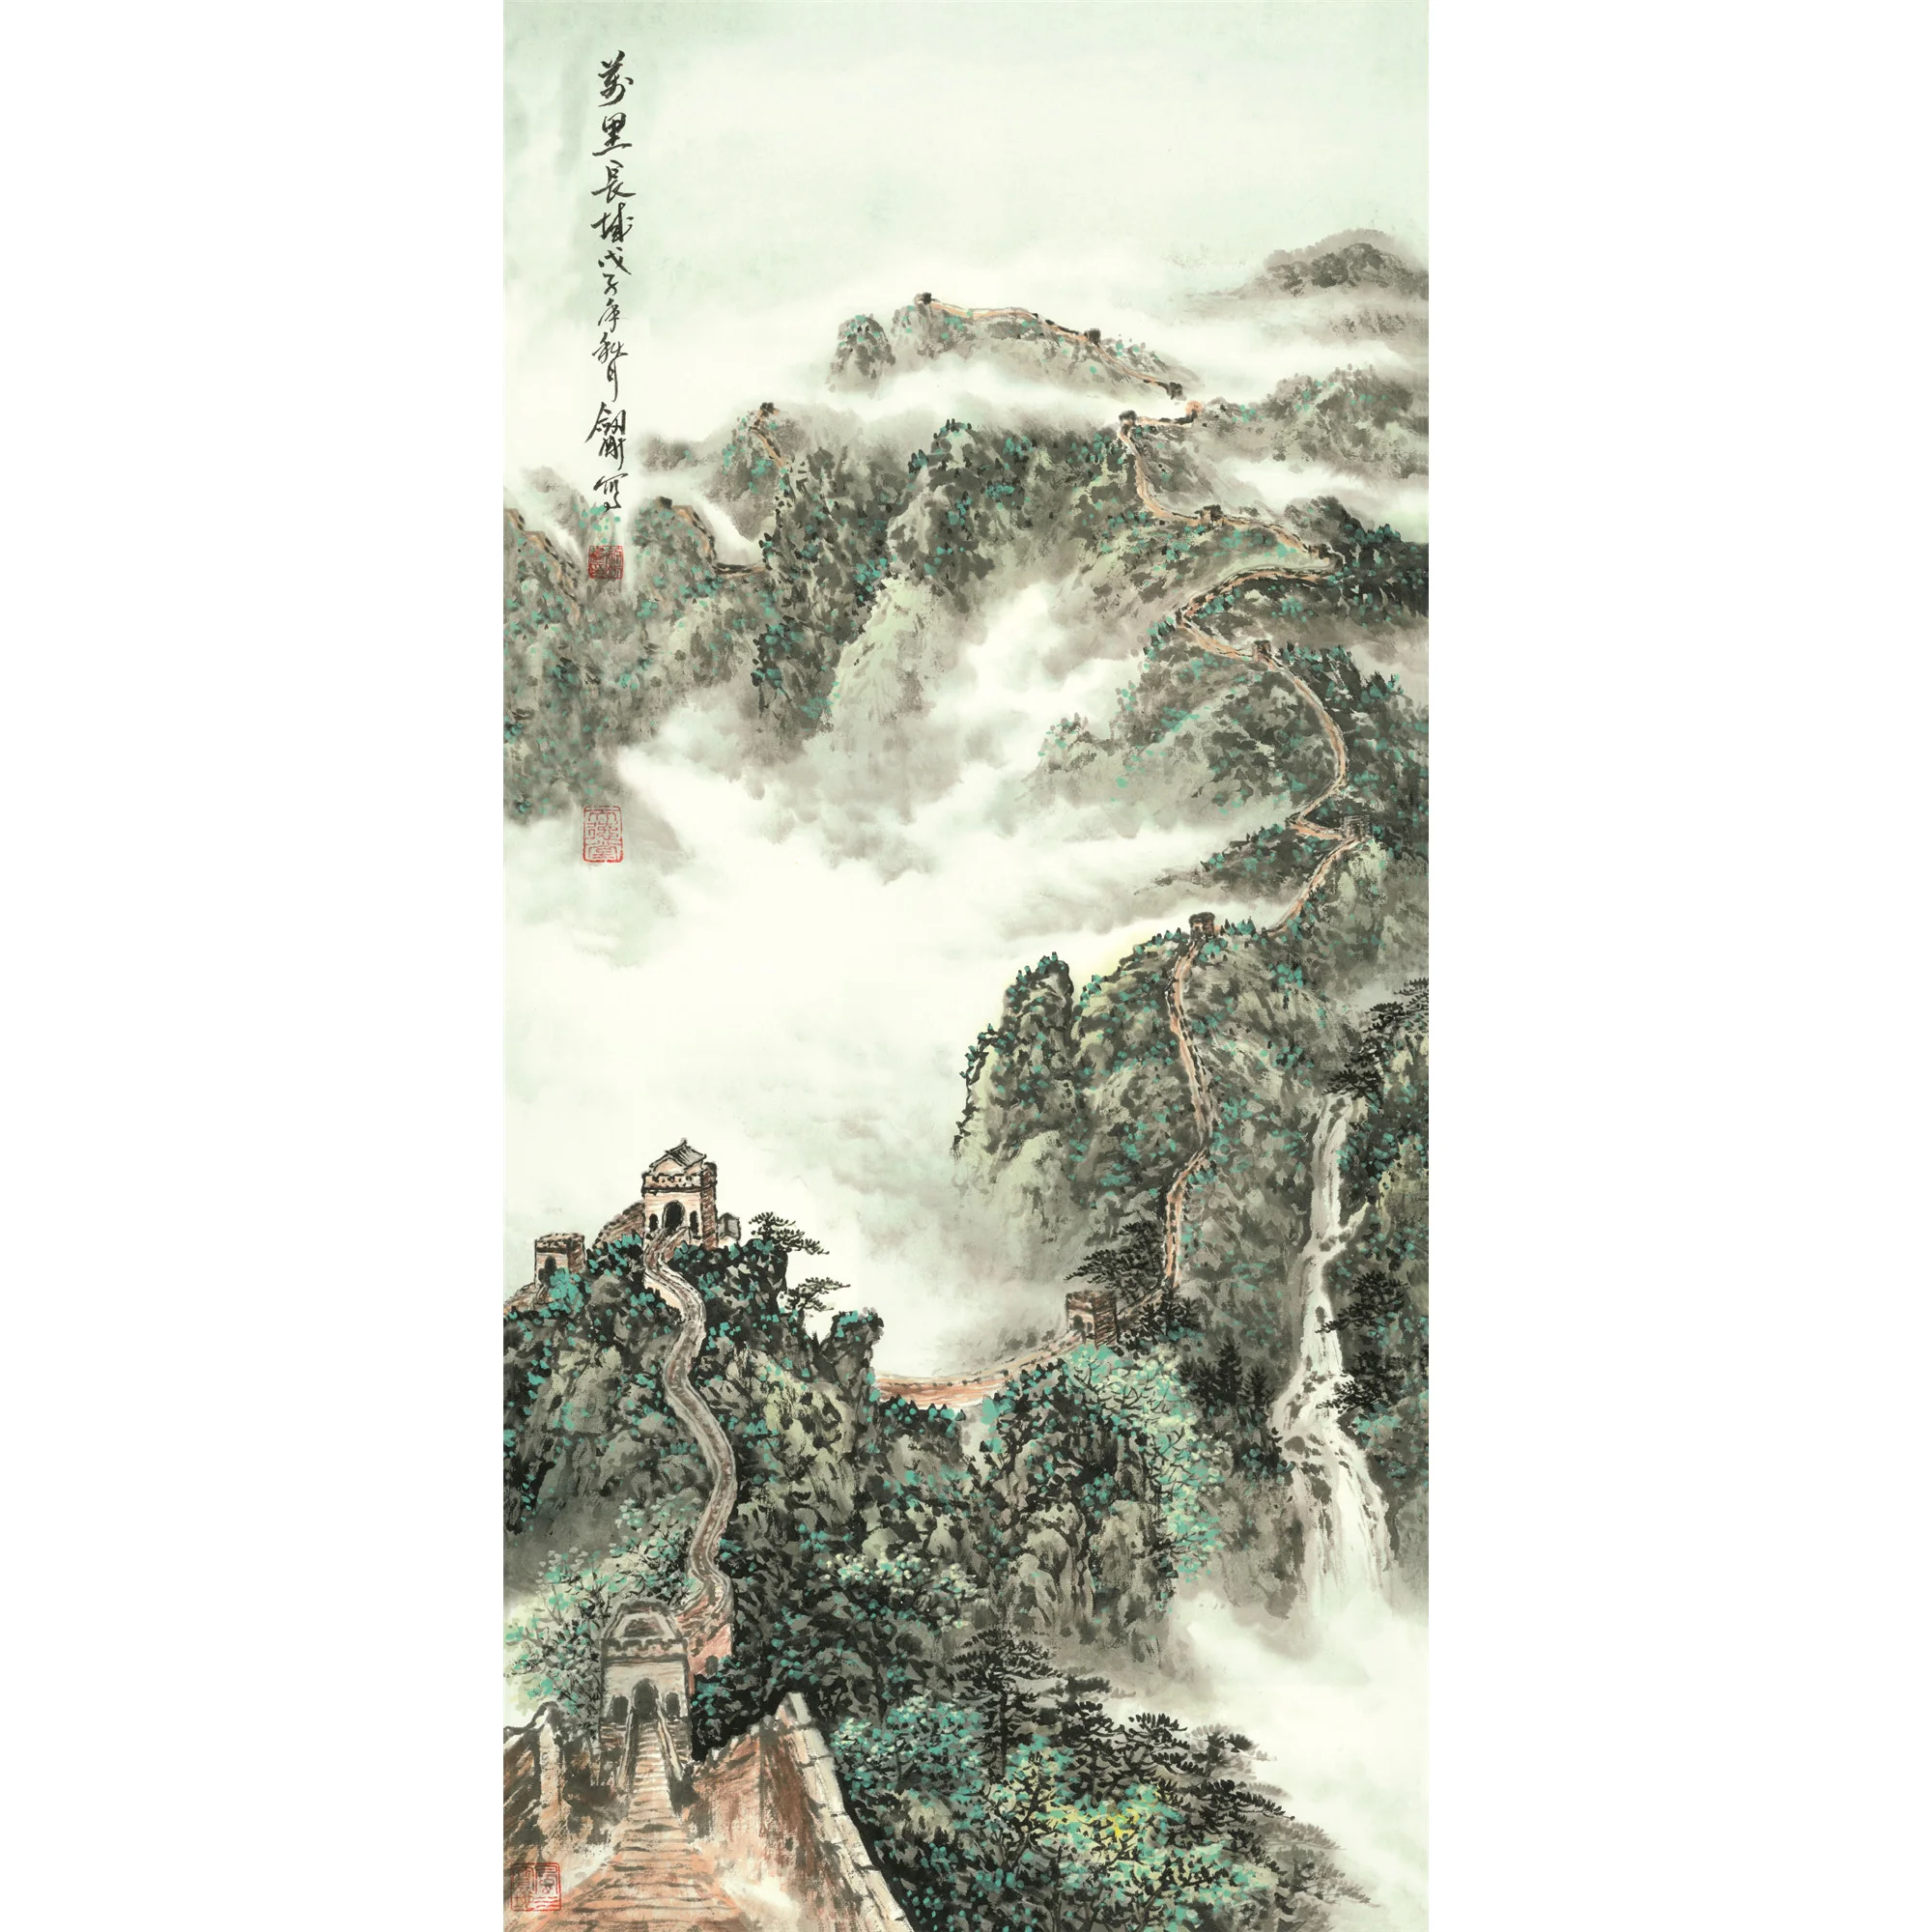 

Asian Wall Scroll Art, Fengshui Home Decoration Artwork, Chinese Traditional Silk Scroll Painting Wall Pictures - Great Wall